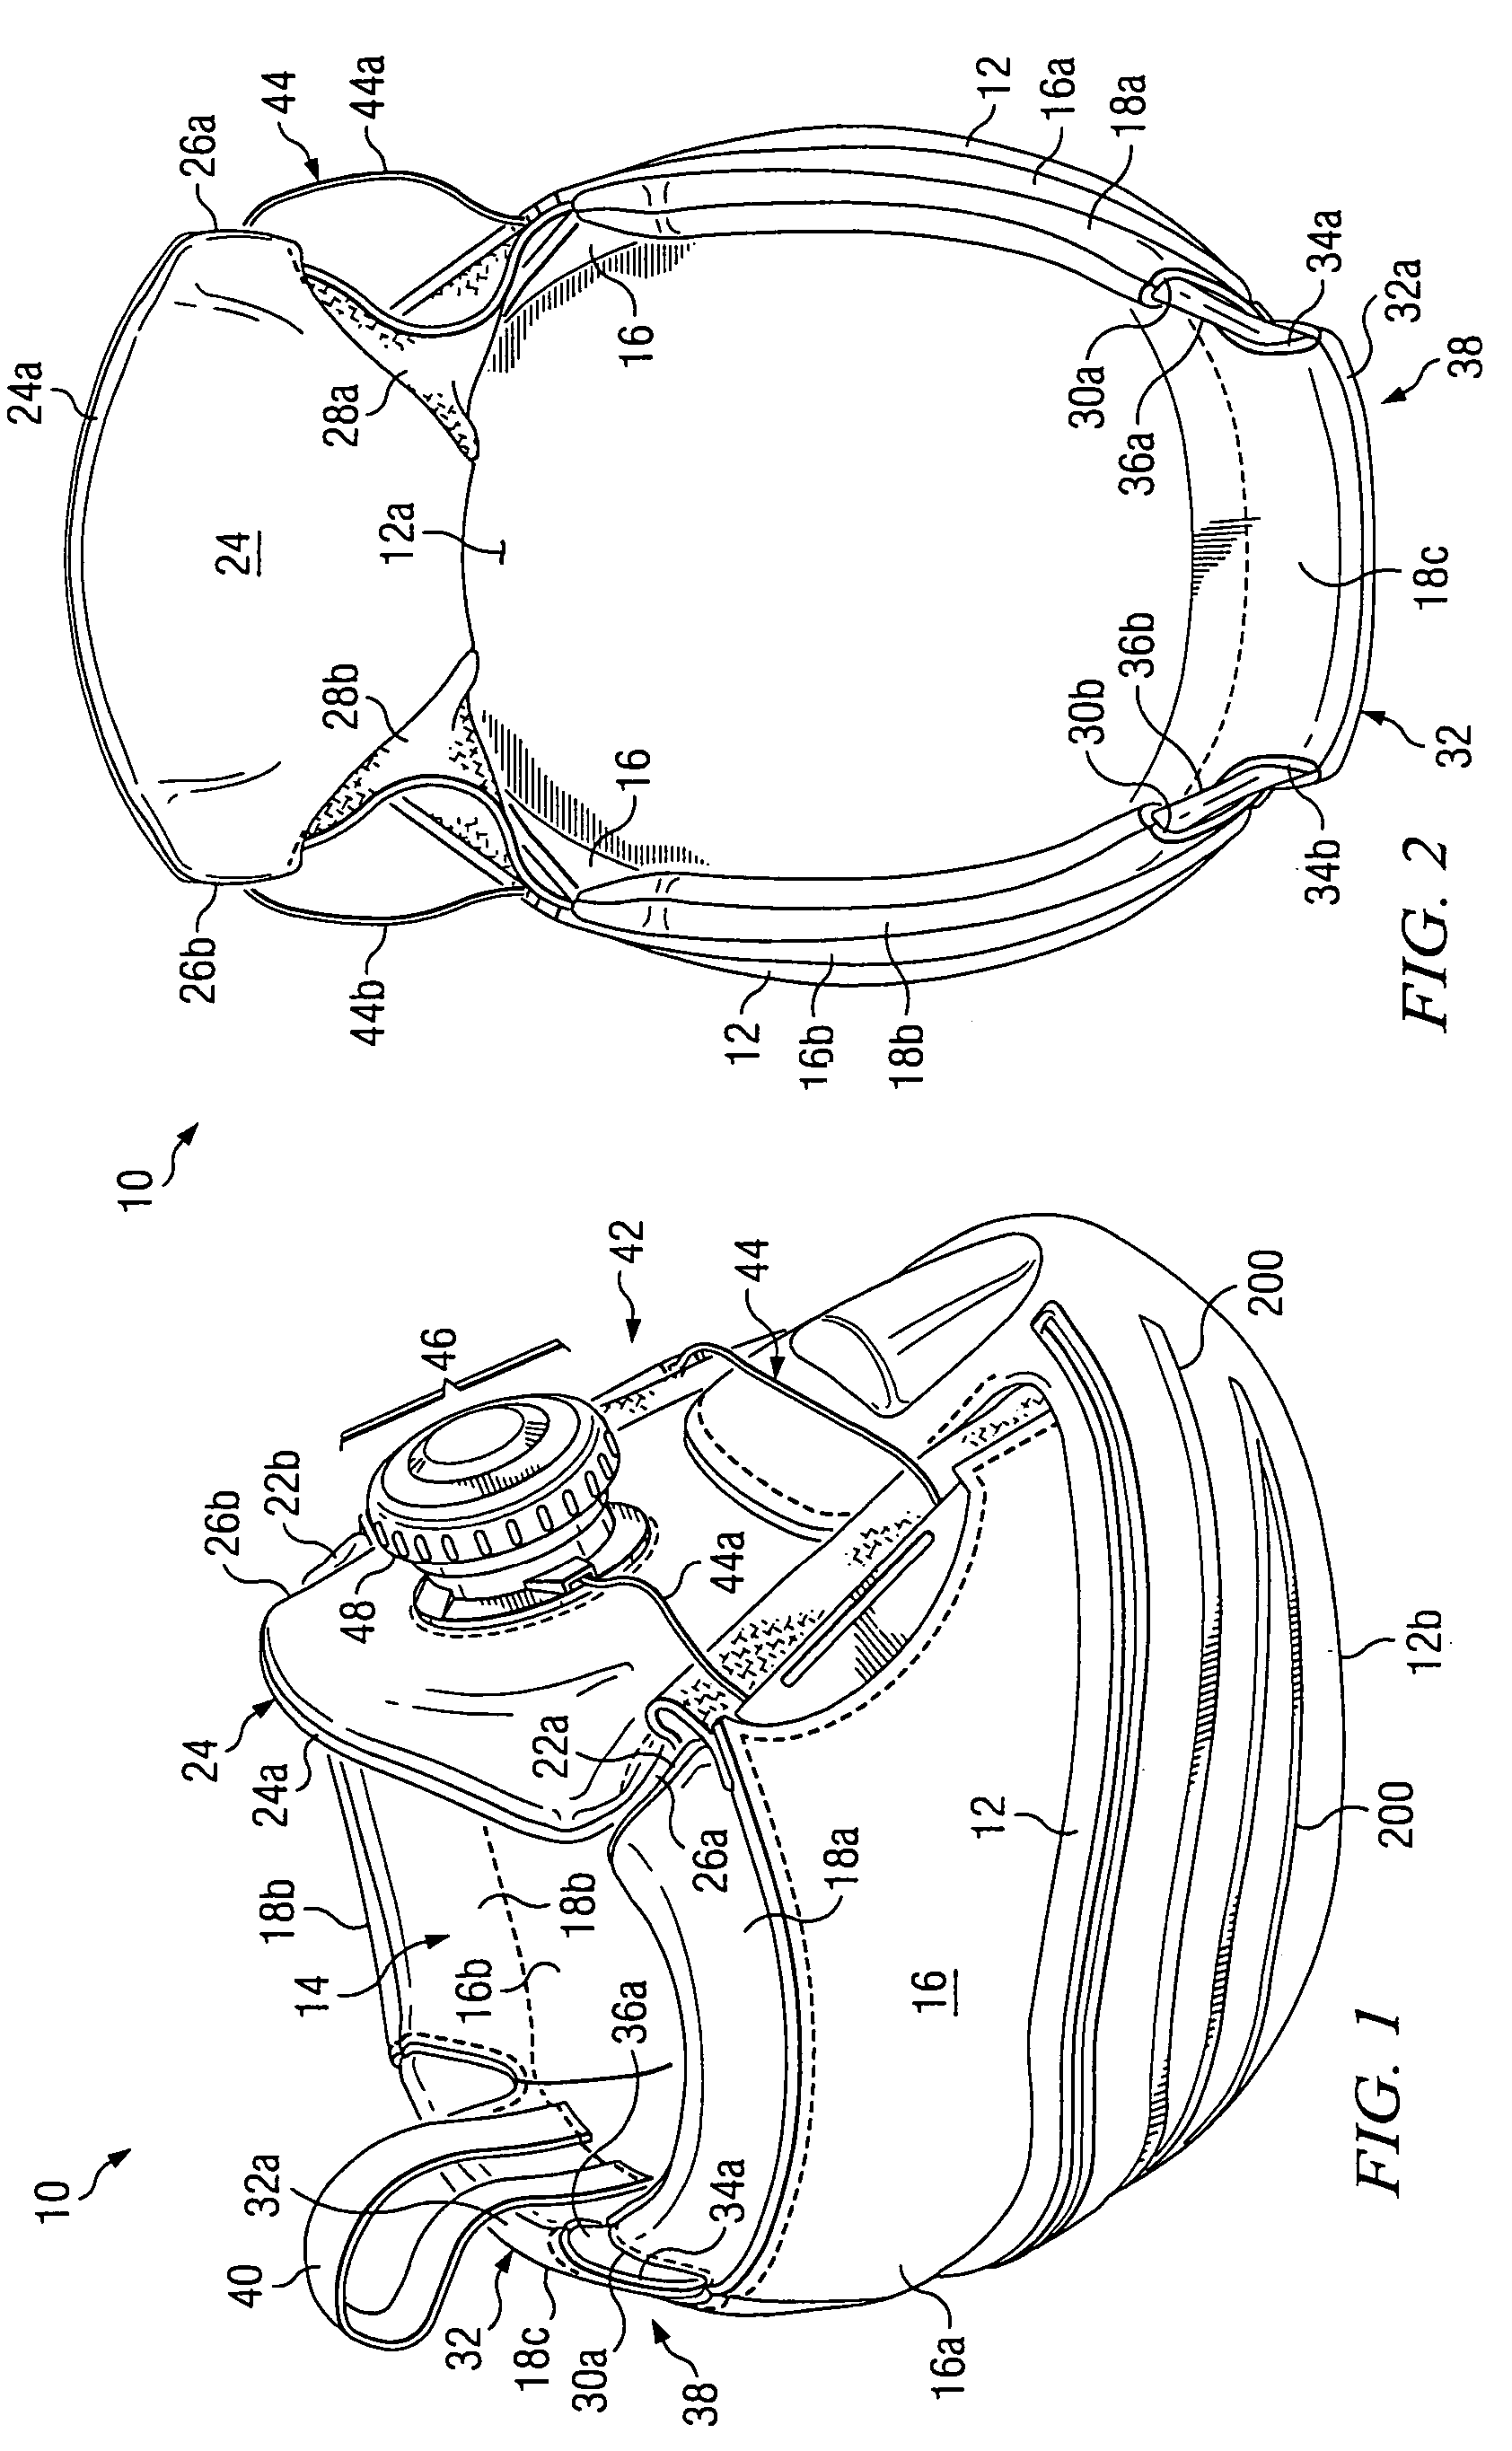 Horse boot with dual tongue entry system